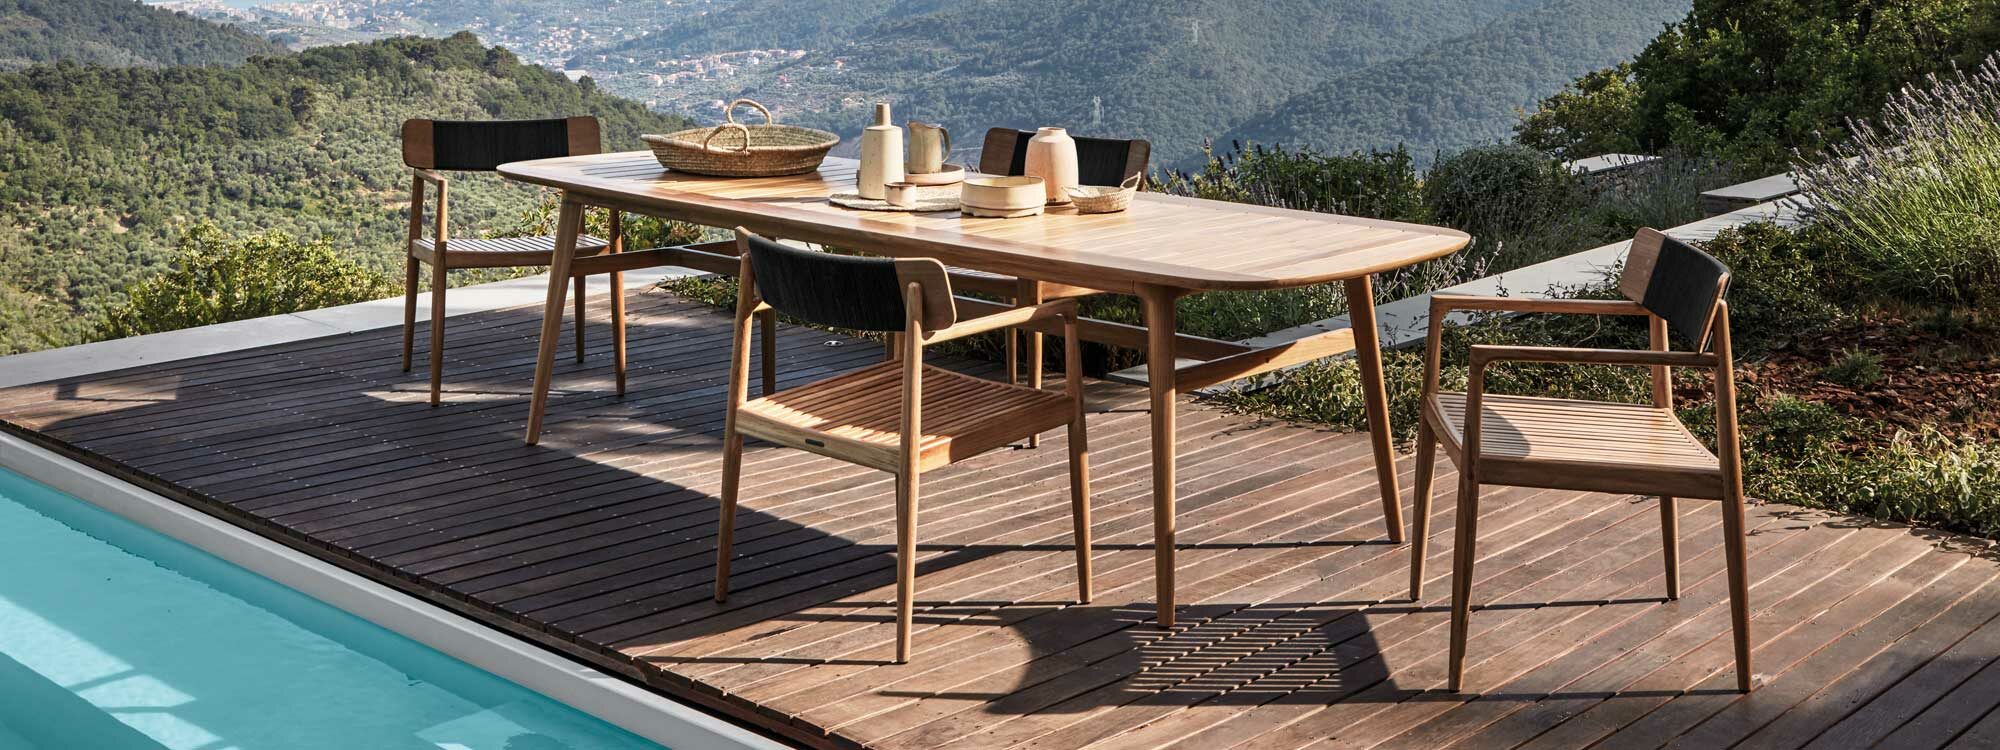 Image of Archi modern teak garden chairs and Gloster teak dining table on sunny poolside, with undulating hills and countryside in the background